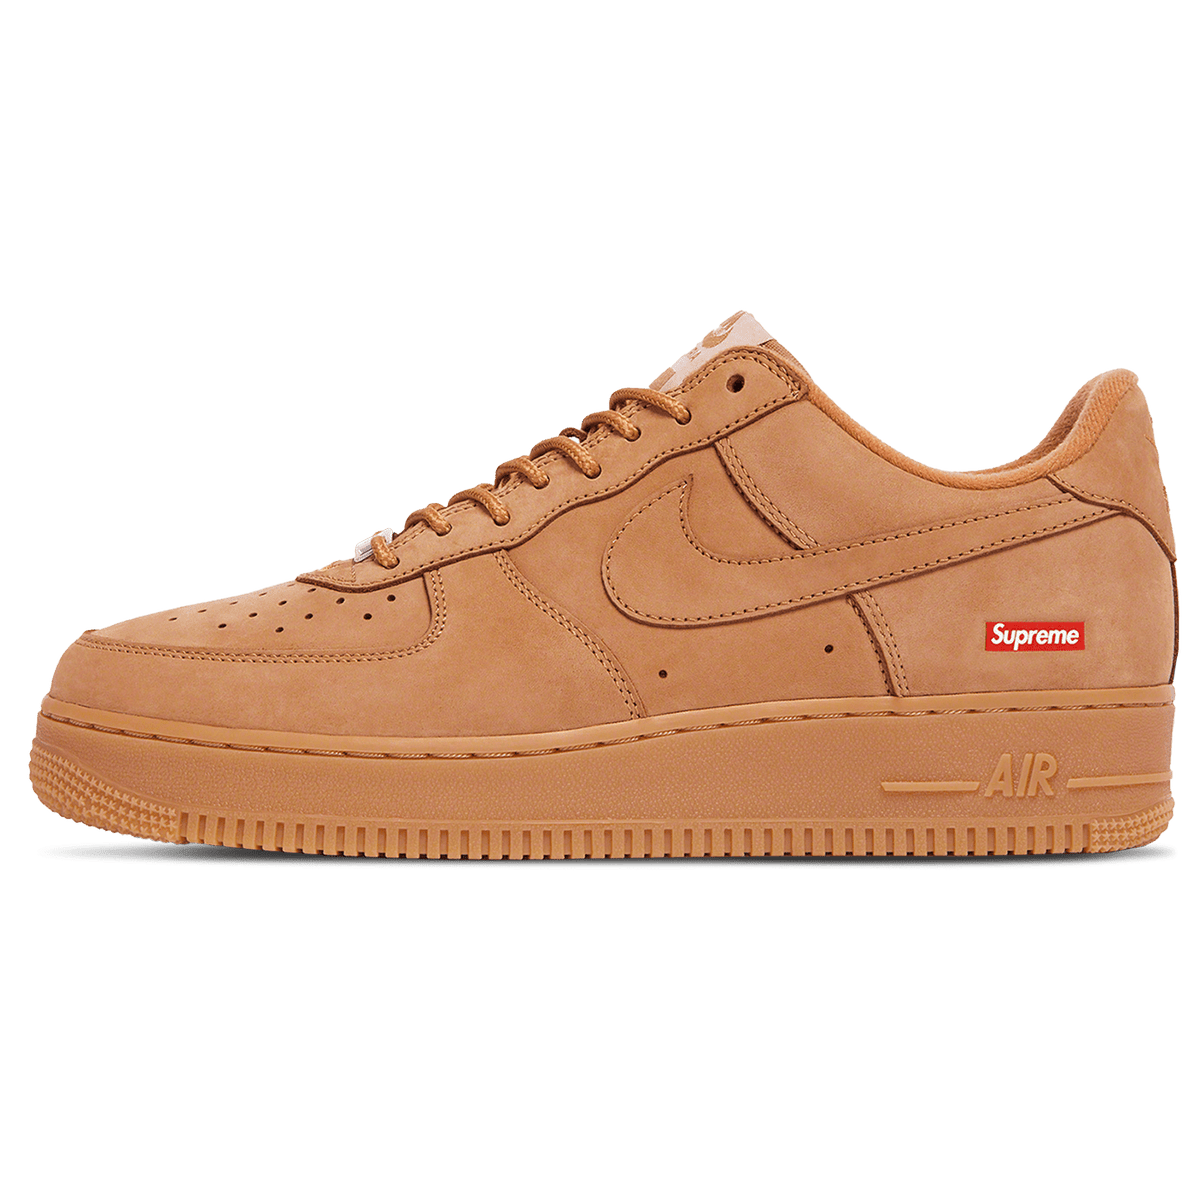 Supreme x Nike nike casual large shoes for men size 15 Low SP 'Flax' - UrlfreezeShops